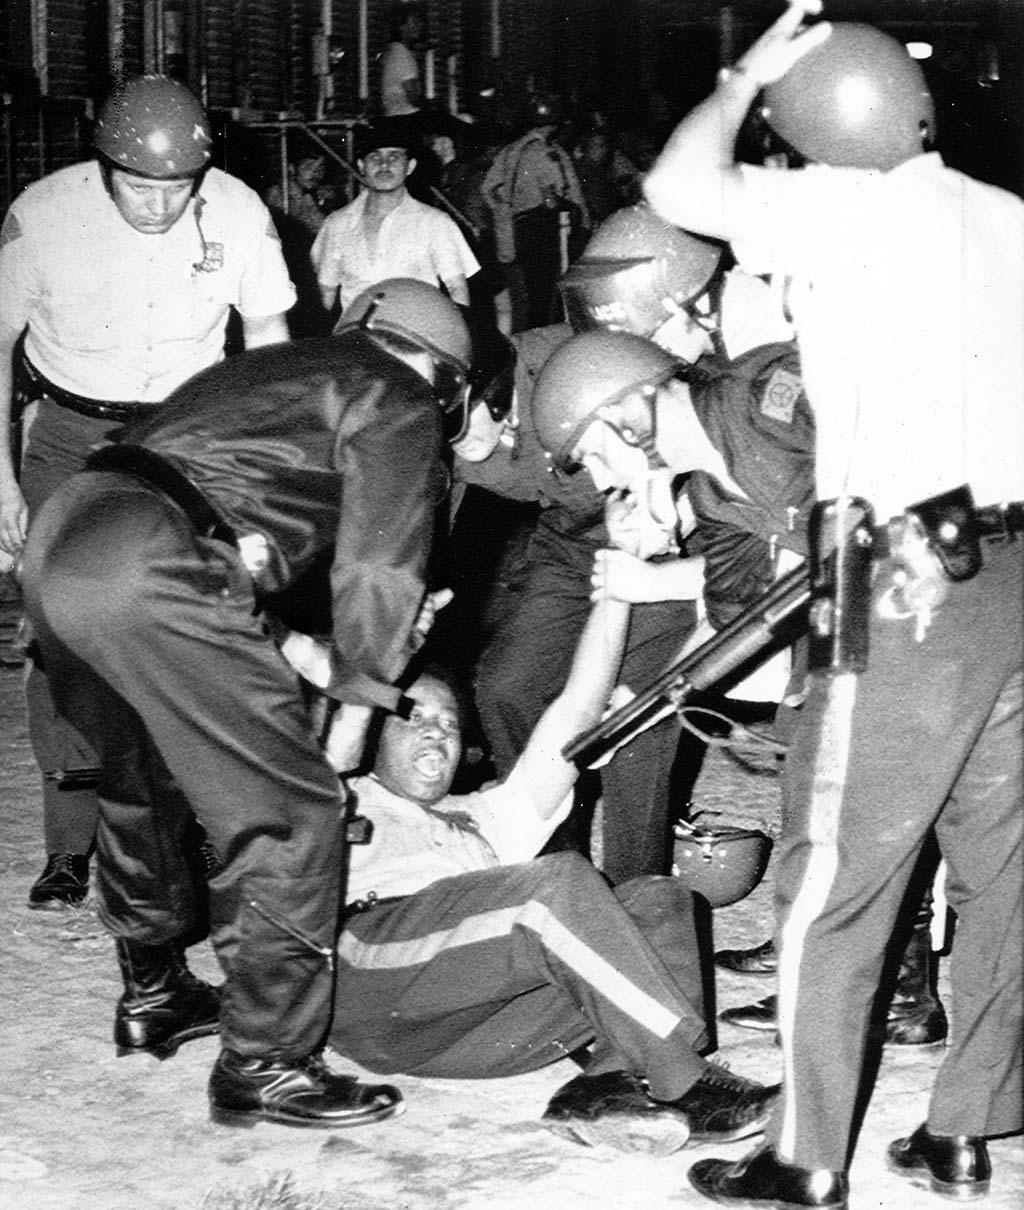 Camden, New Jersey Riots (1969 and 1971)